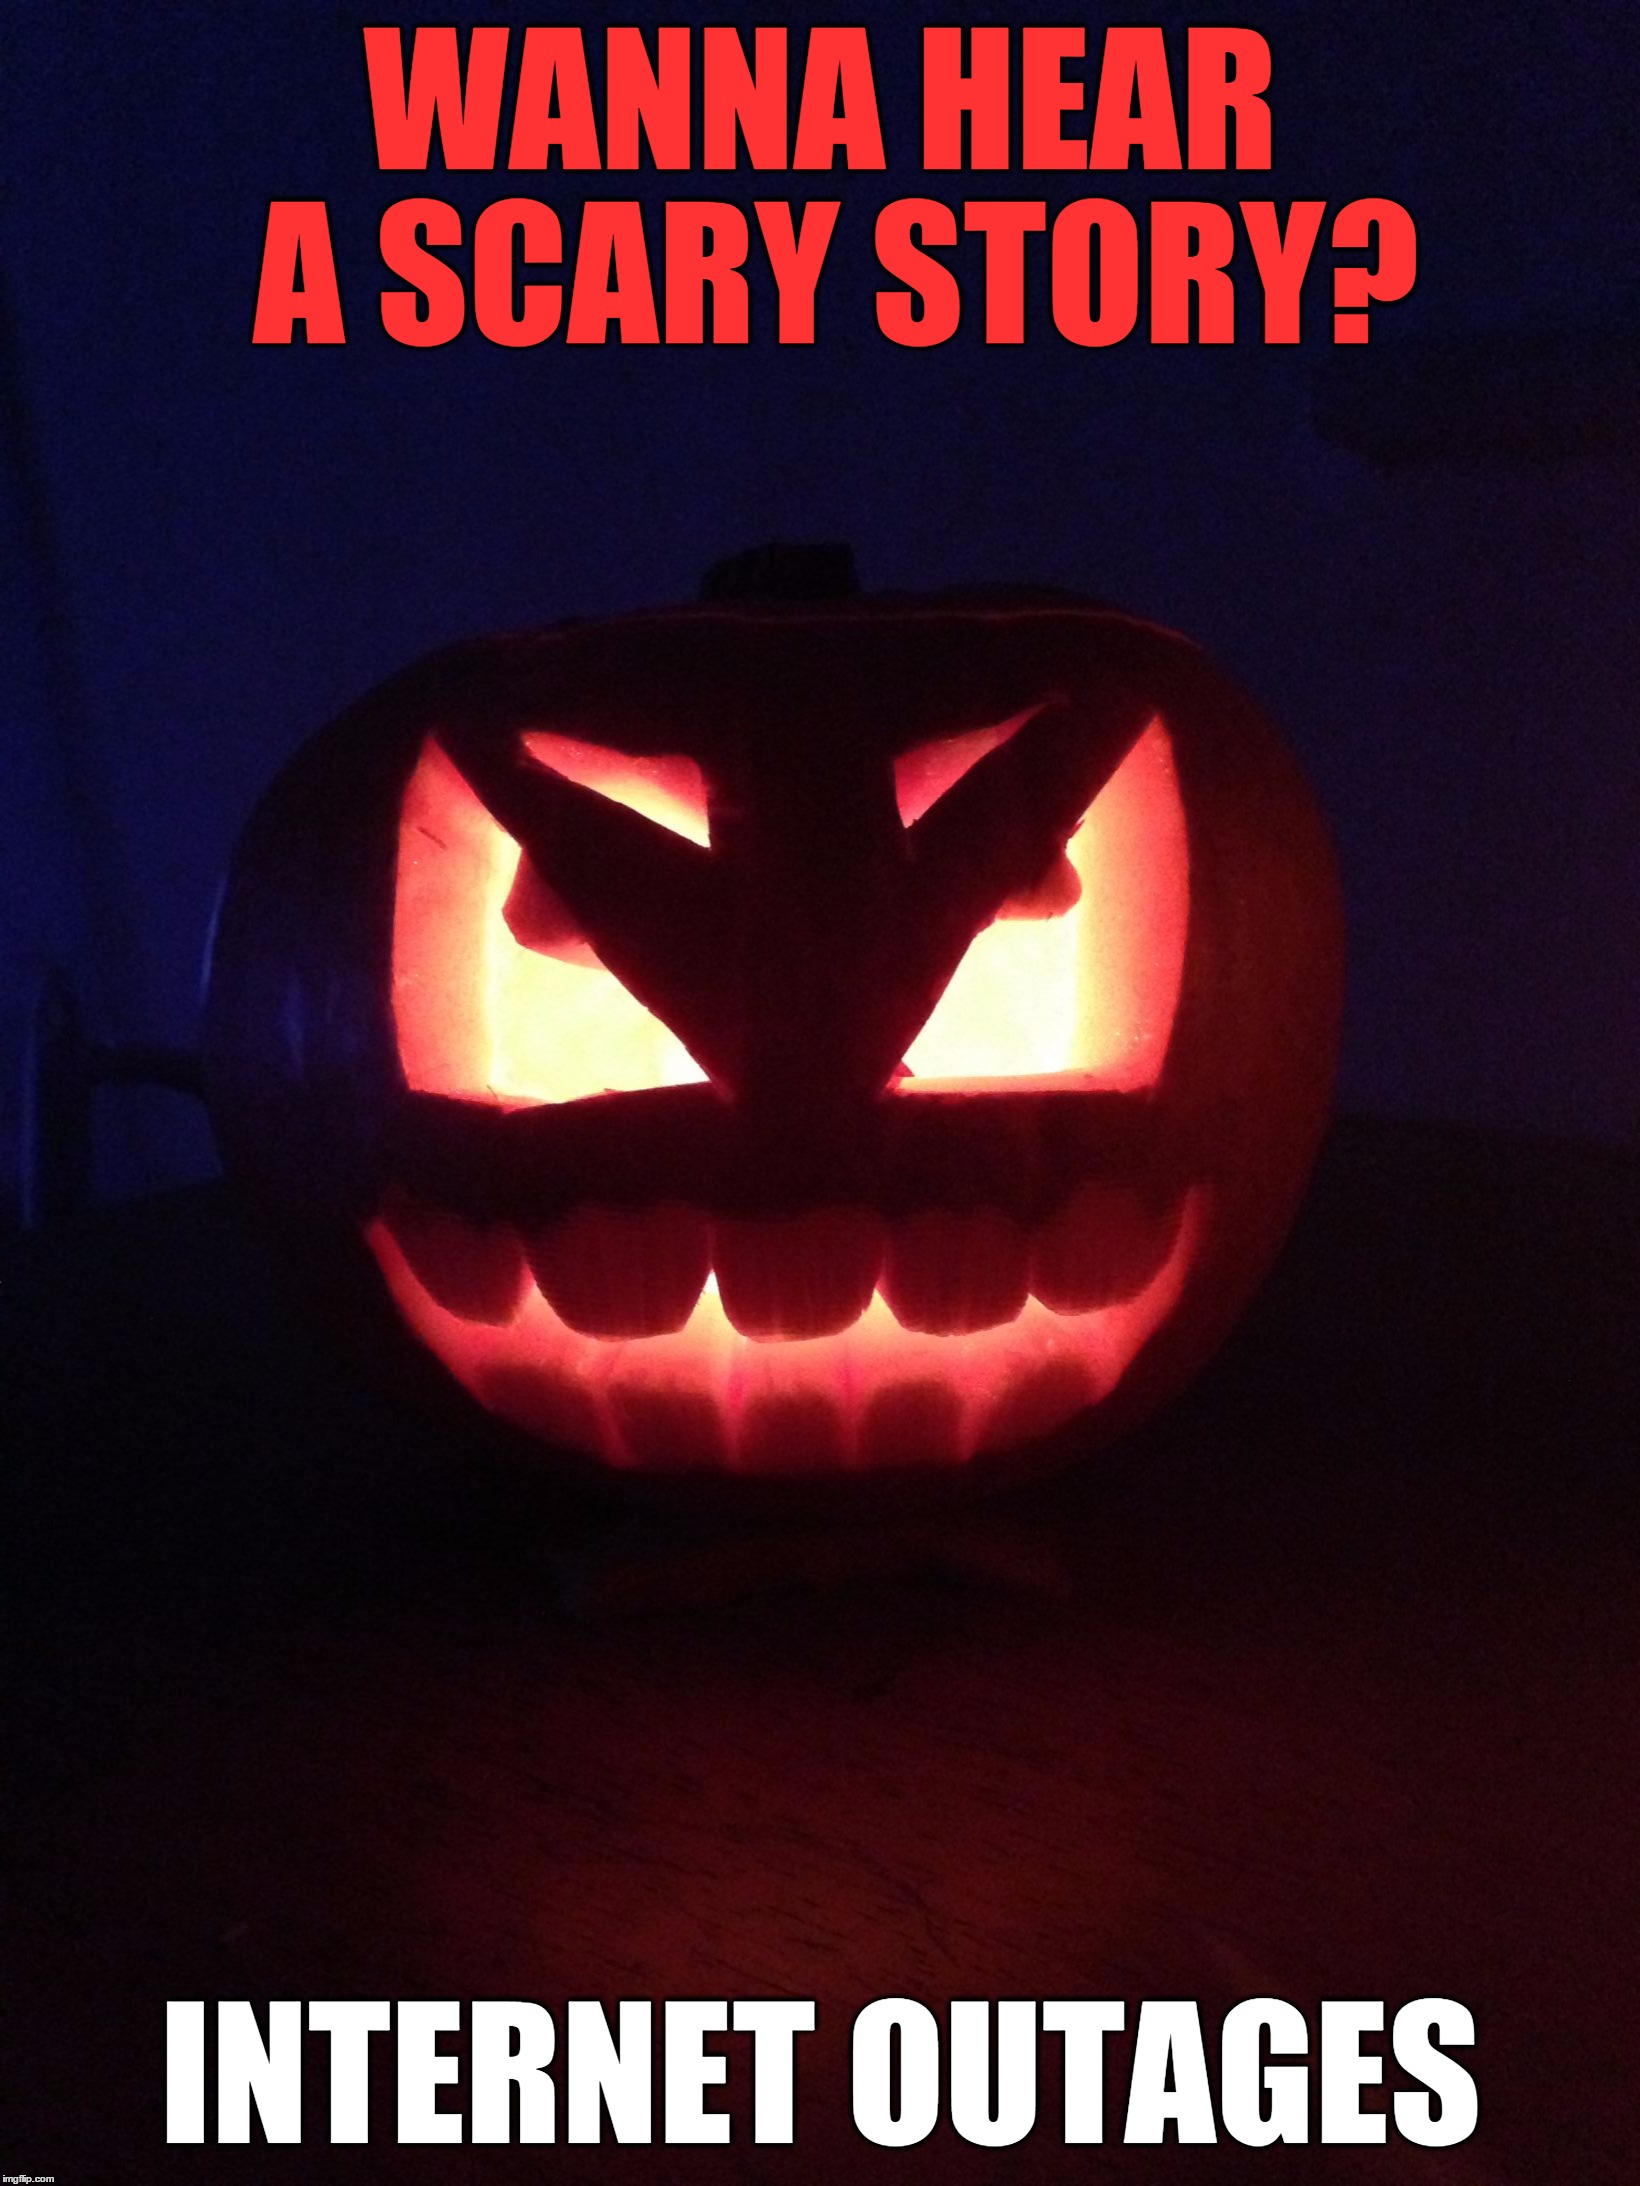 Scary Story Pumpkin | WANNA HEAR A SCARY STORY? INTERNET OUTAGES | image tagged in pumpkin,scary,halloween,internet | made w/ Imgflip meme maker